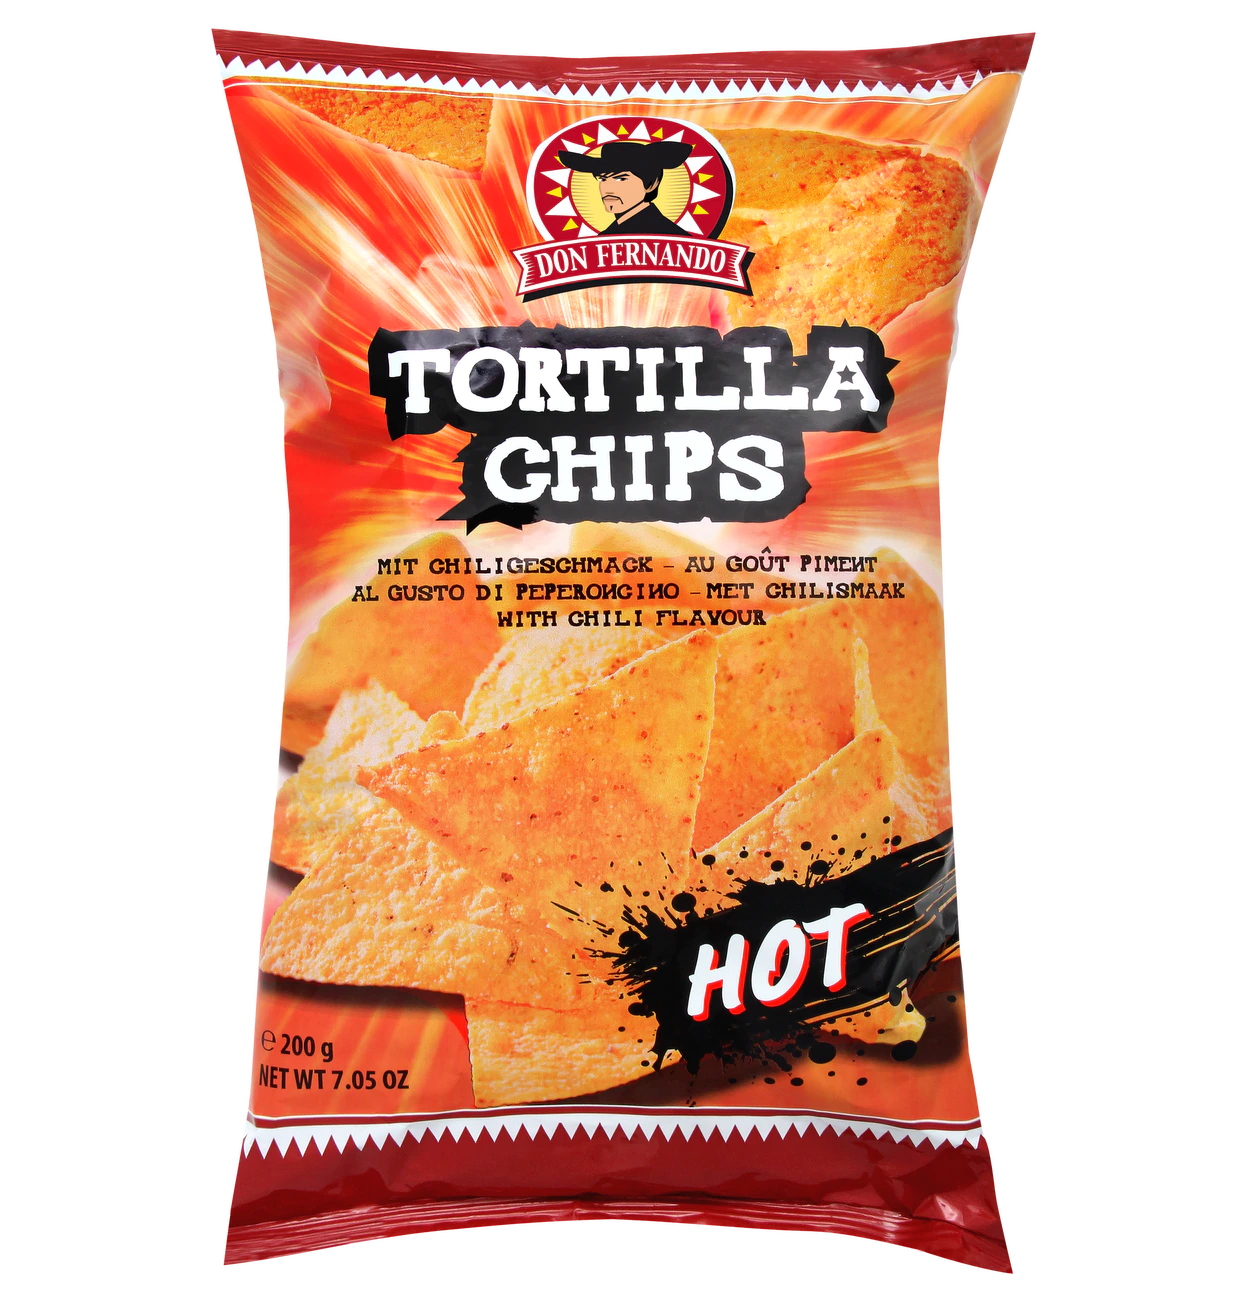 Tortilla Chips hot with chili flavour Don Fernando (22 x 200g)